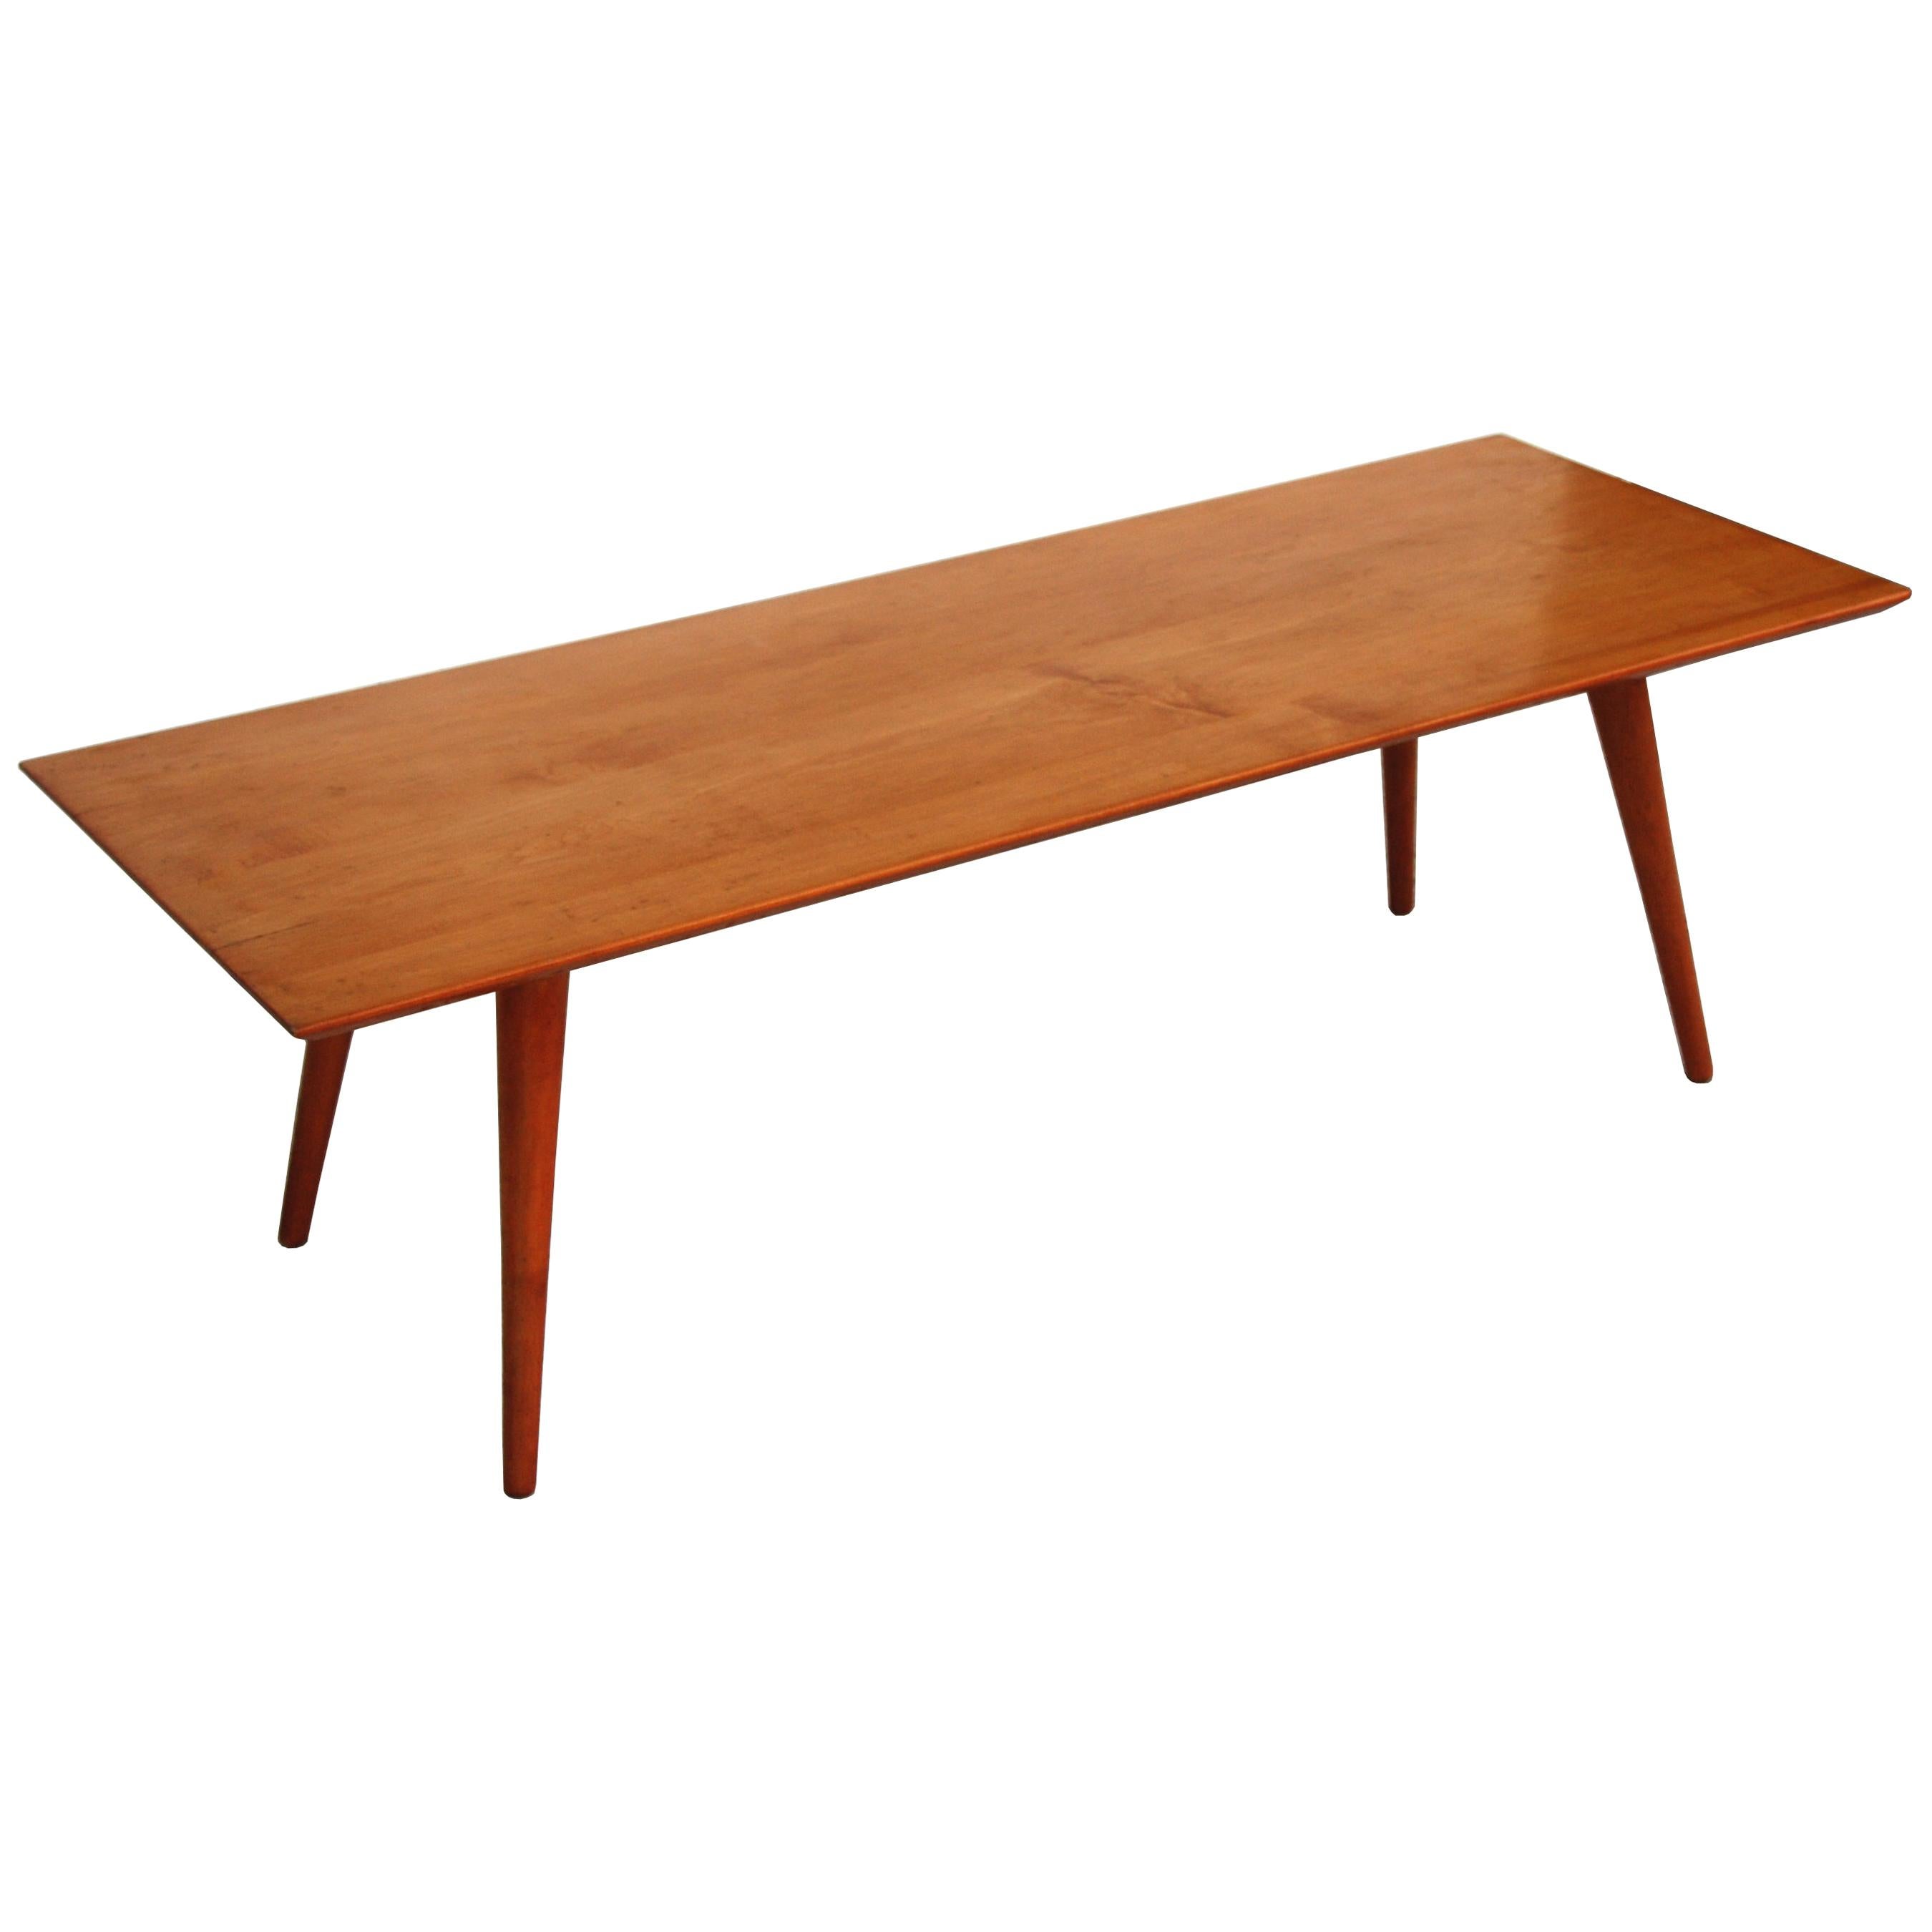 48" Paul McCobb For Winchendon Planner Group Coffee Table Bench